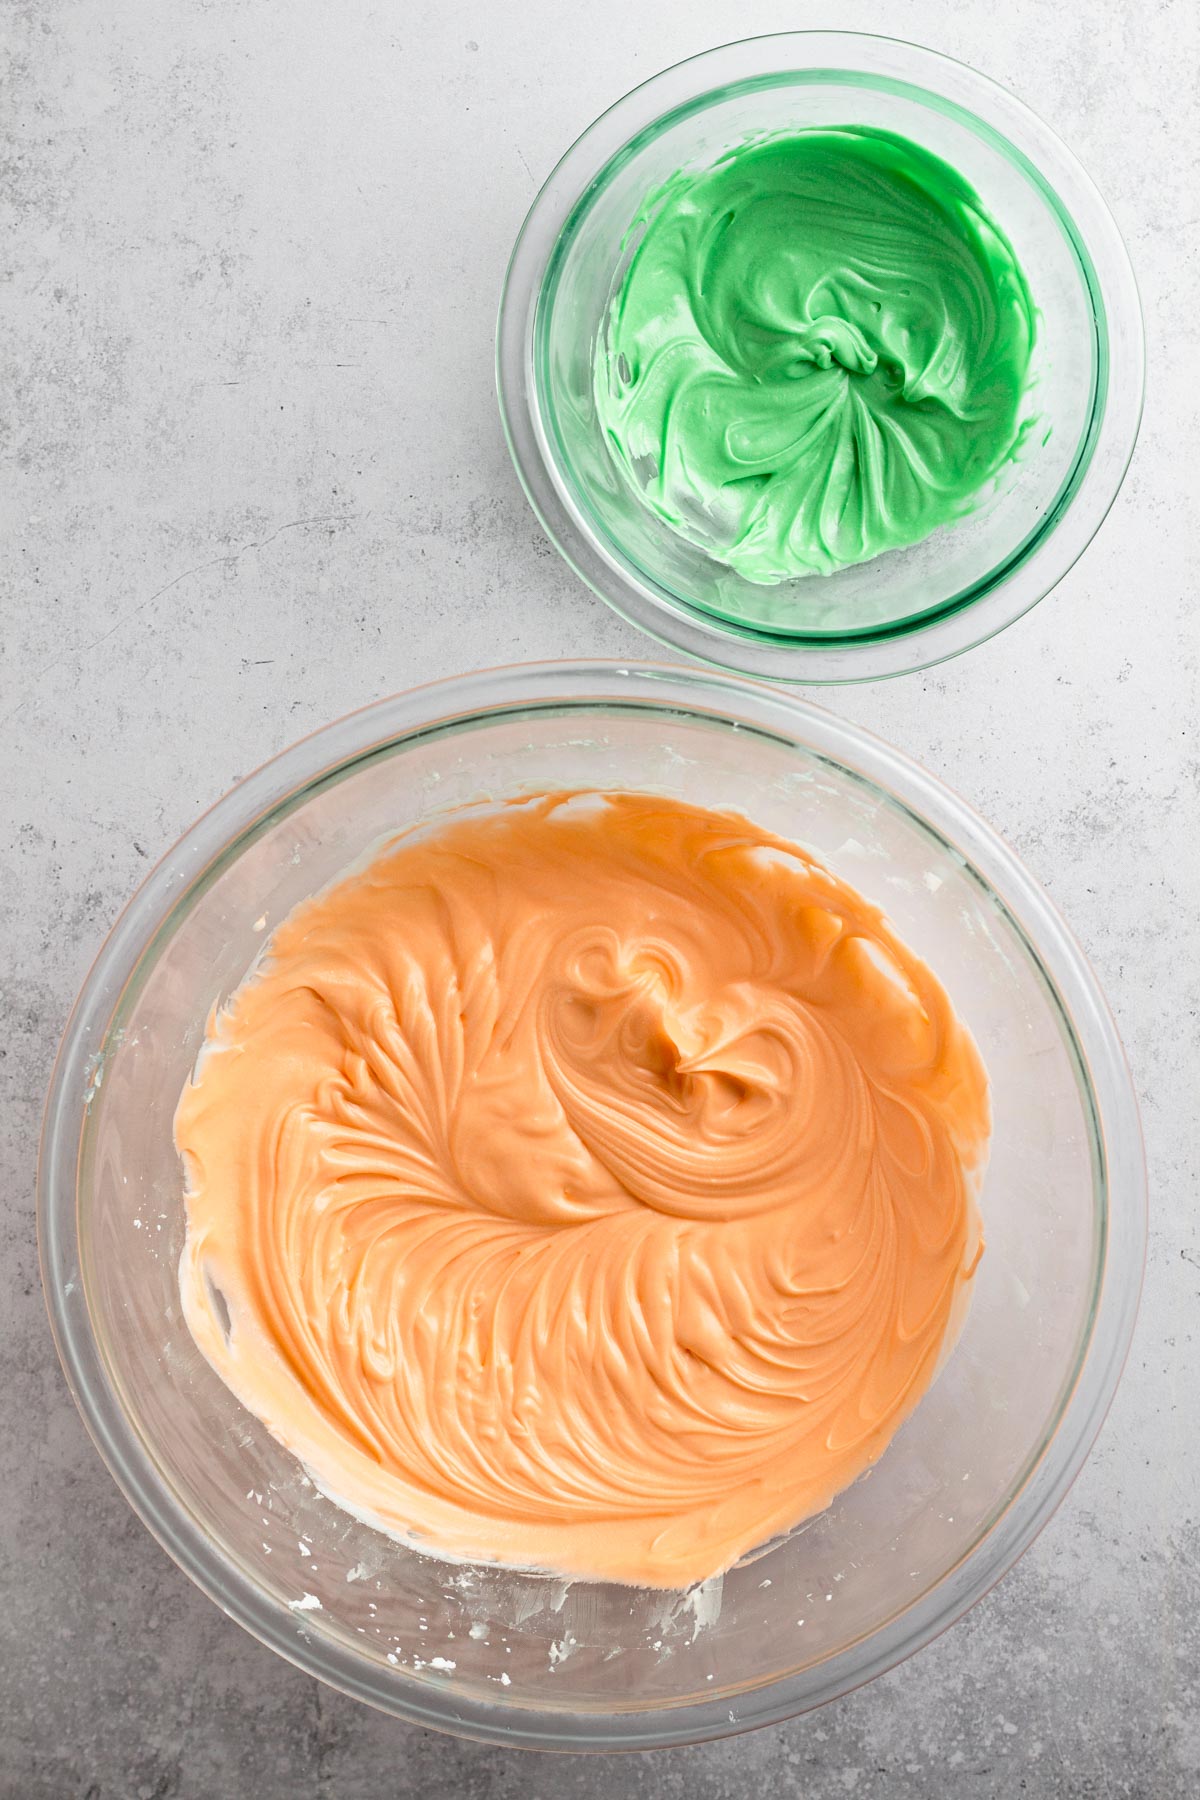 Orange and green frosting in glass bowls.